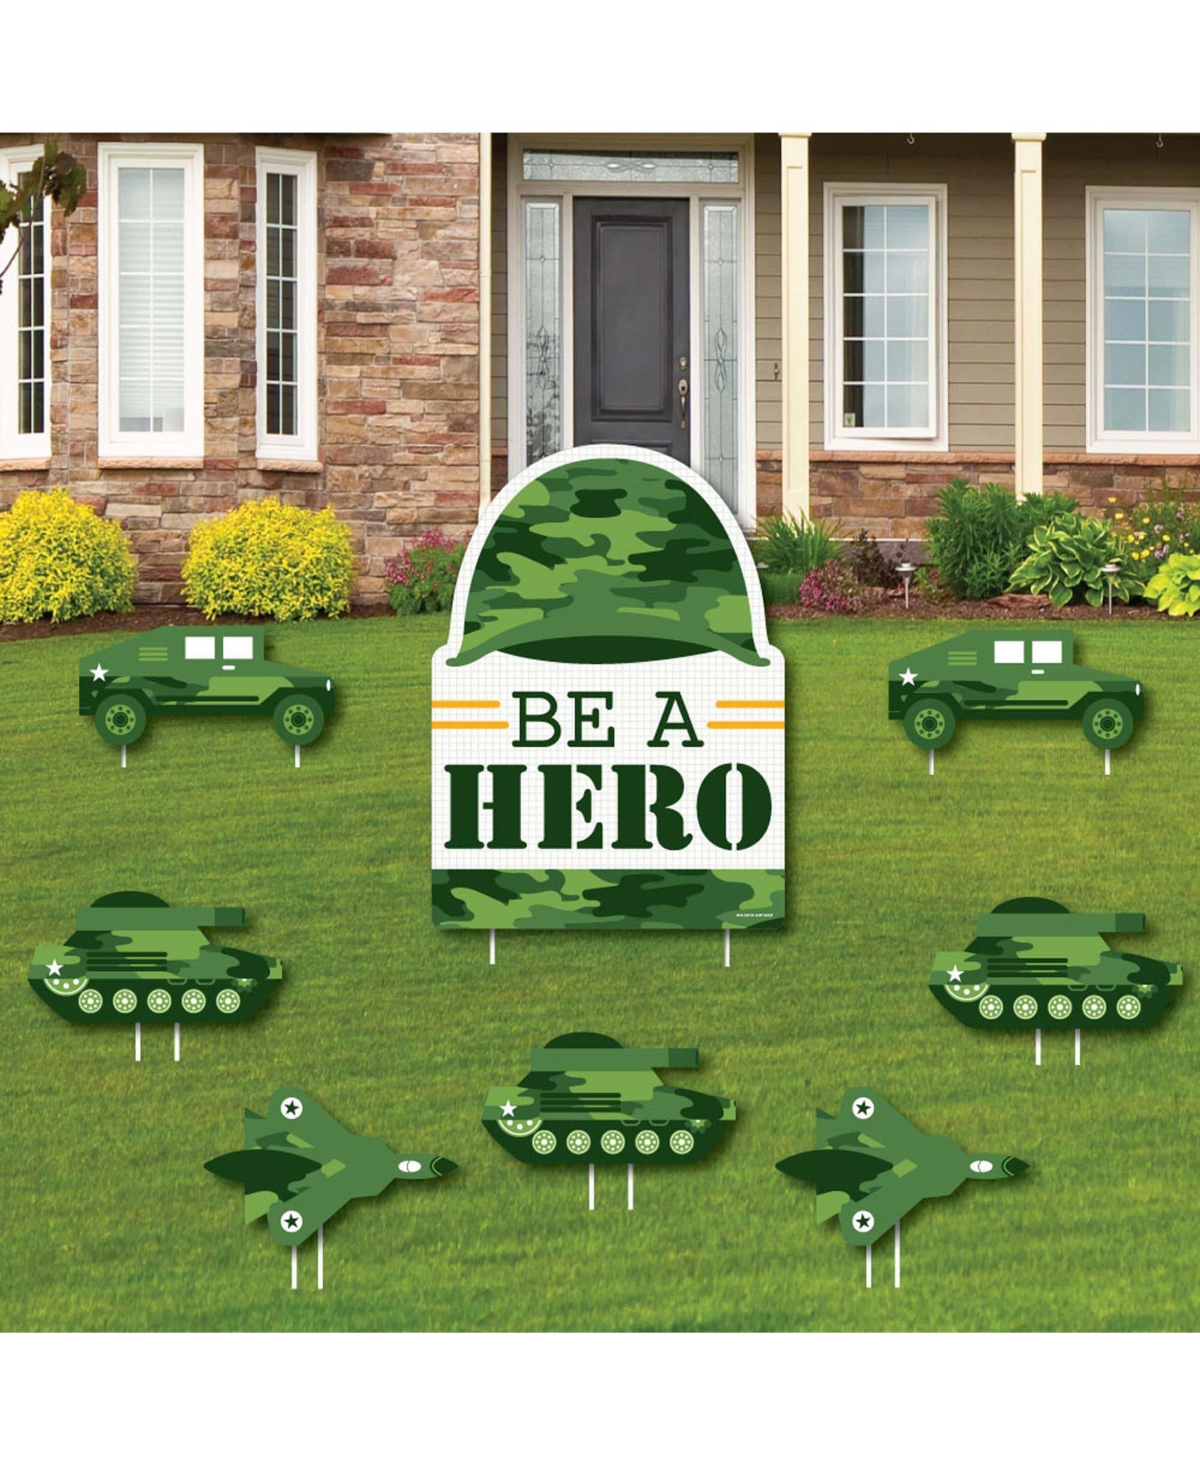 Camo Hero - Outdoor Lawn Decor - Army Military Camouflage Yard Signs - Set of 8